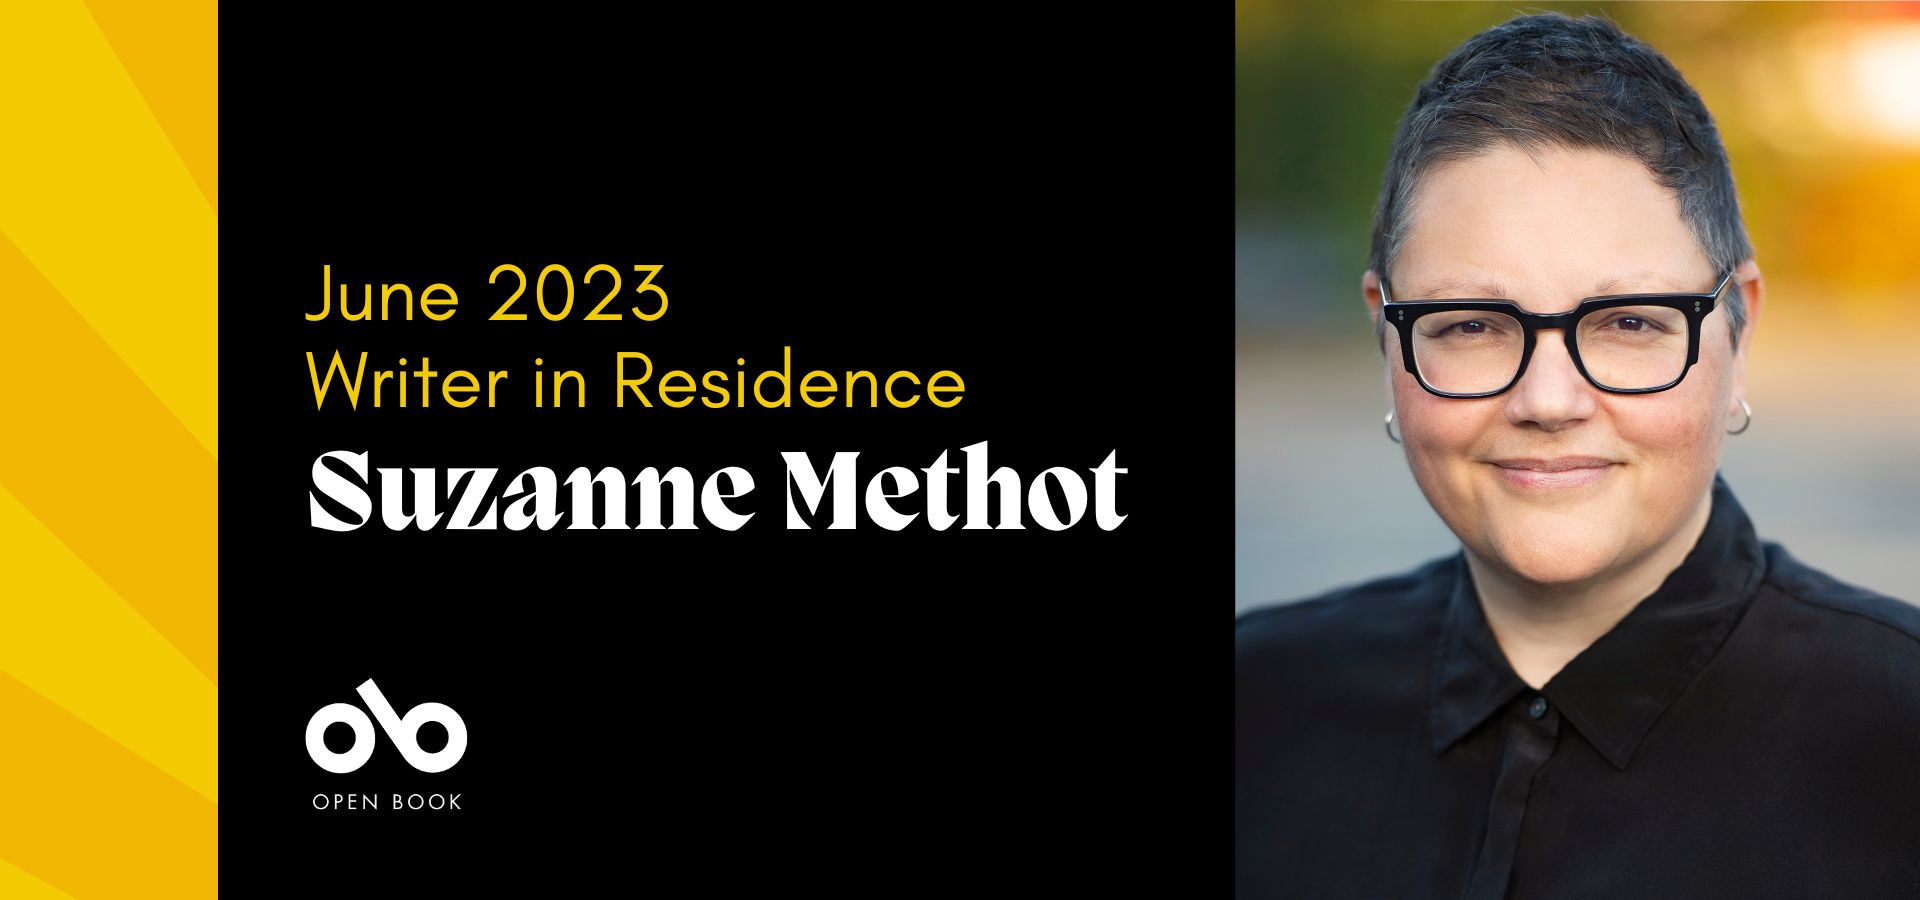 yellow and black banner image with photo of writer Suzanne Methot and text reading "June 2023 writer in residence Suzanne Methot"